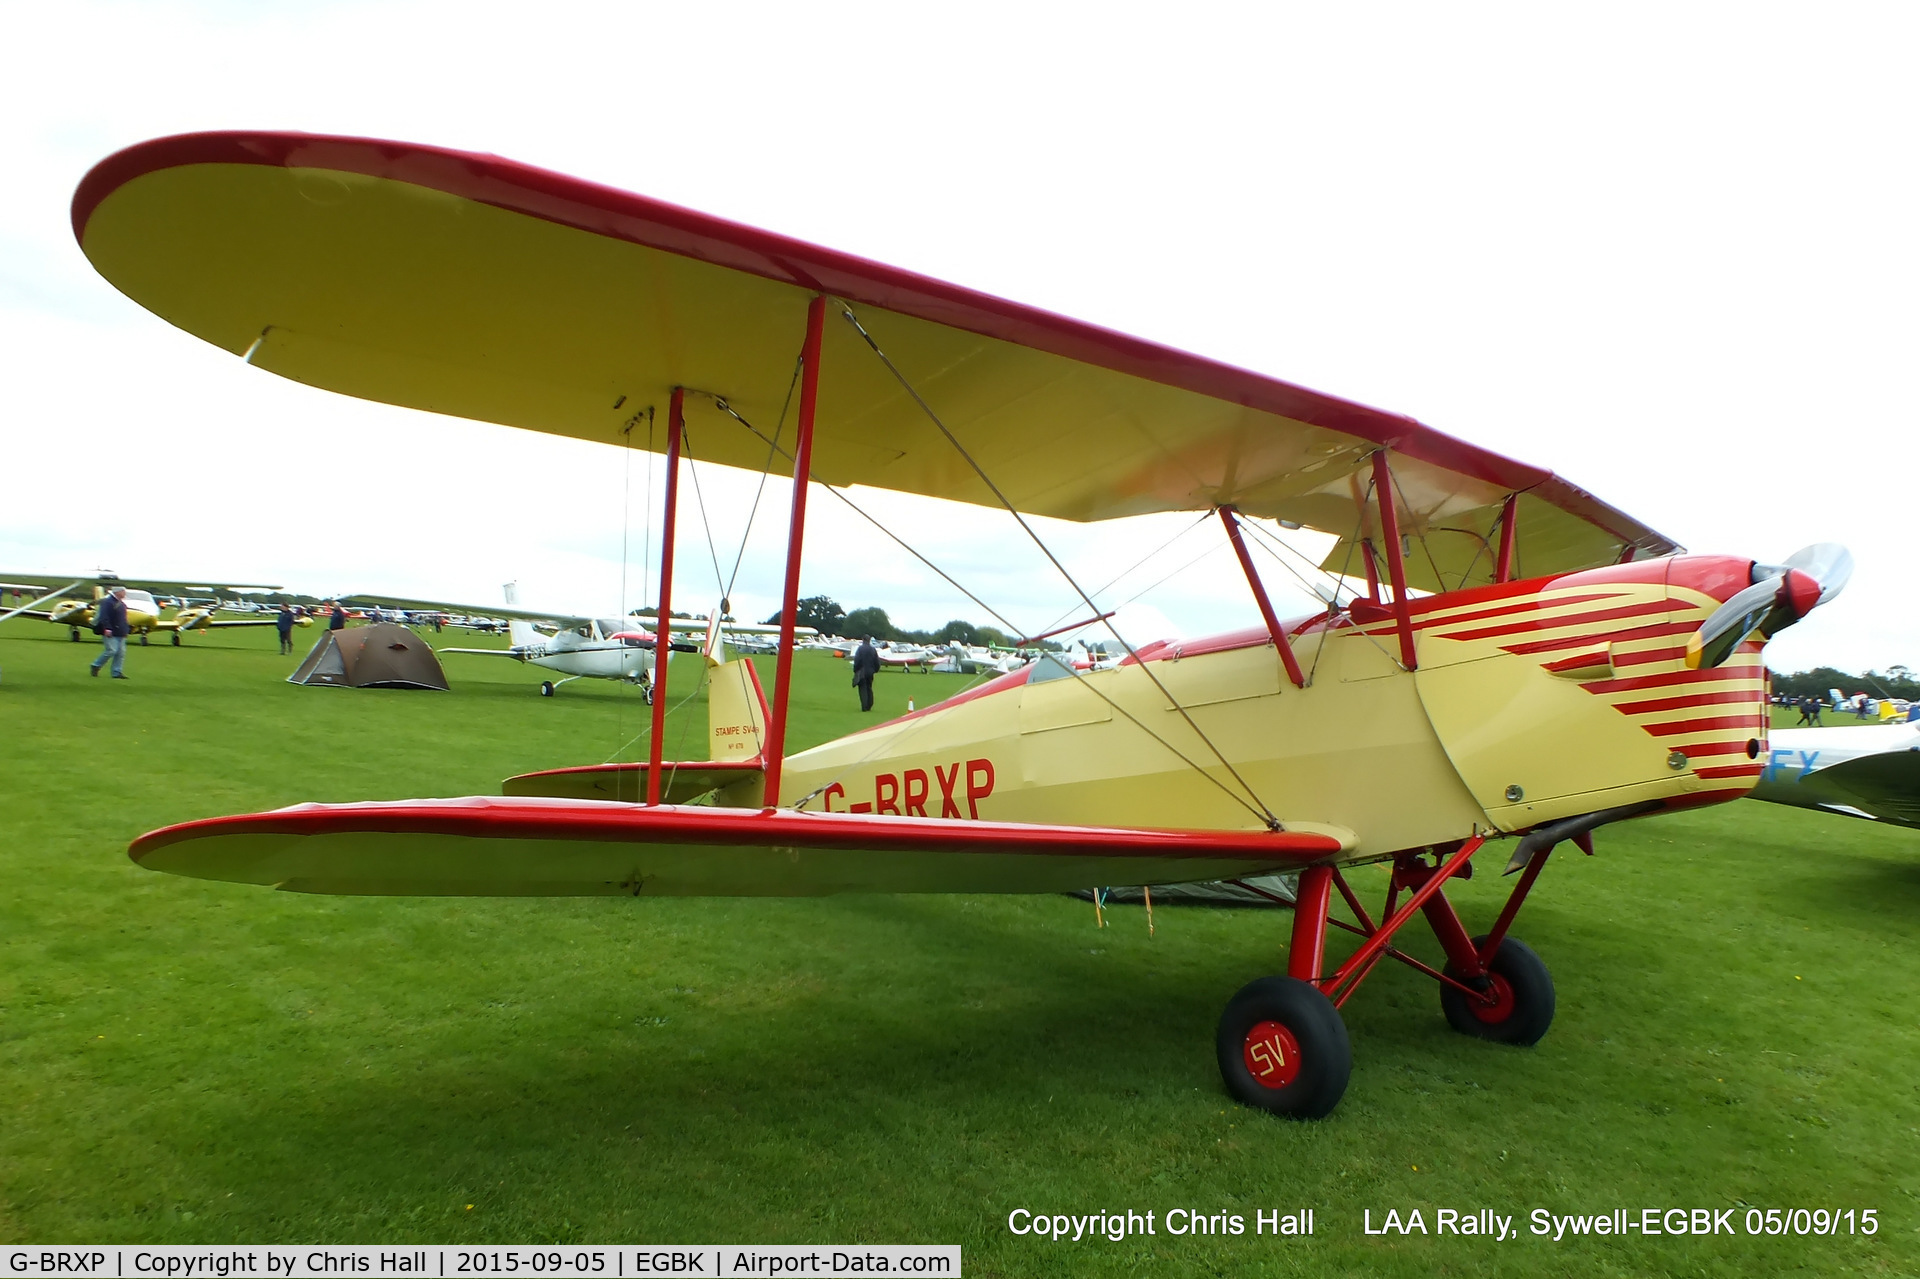 G-BRXP, 1948 Stampe-Vertongen SV-4C C/N 678, at the LAA Rally 2015, Sywell